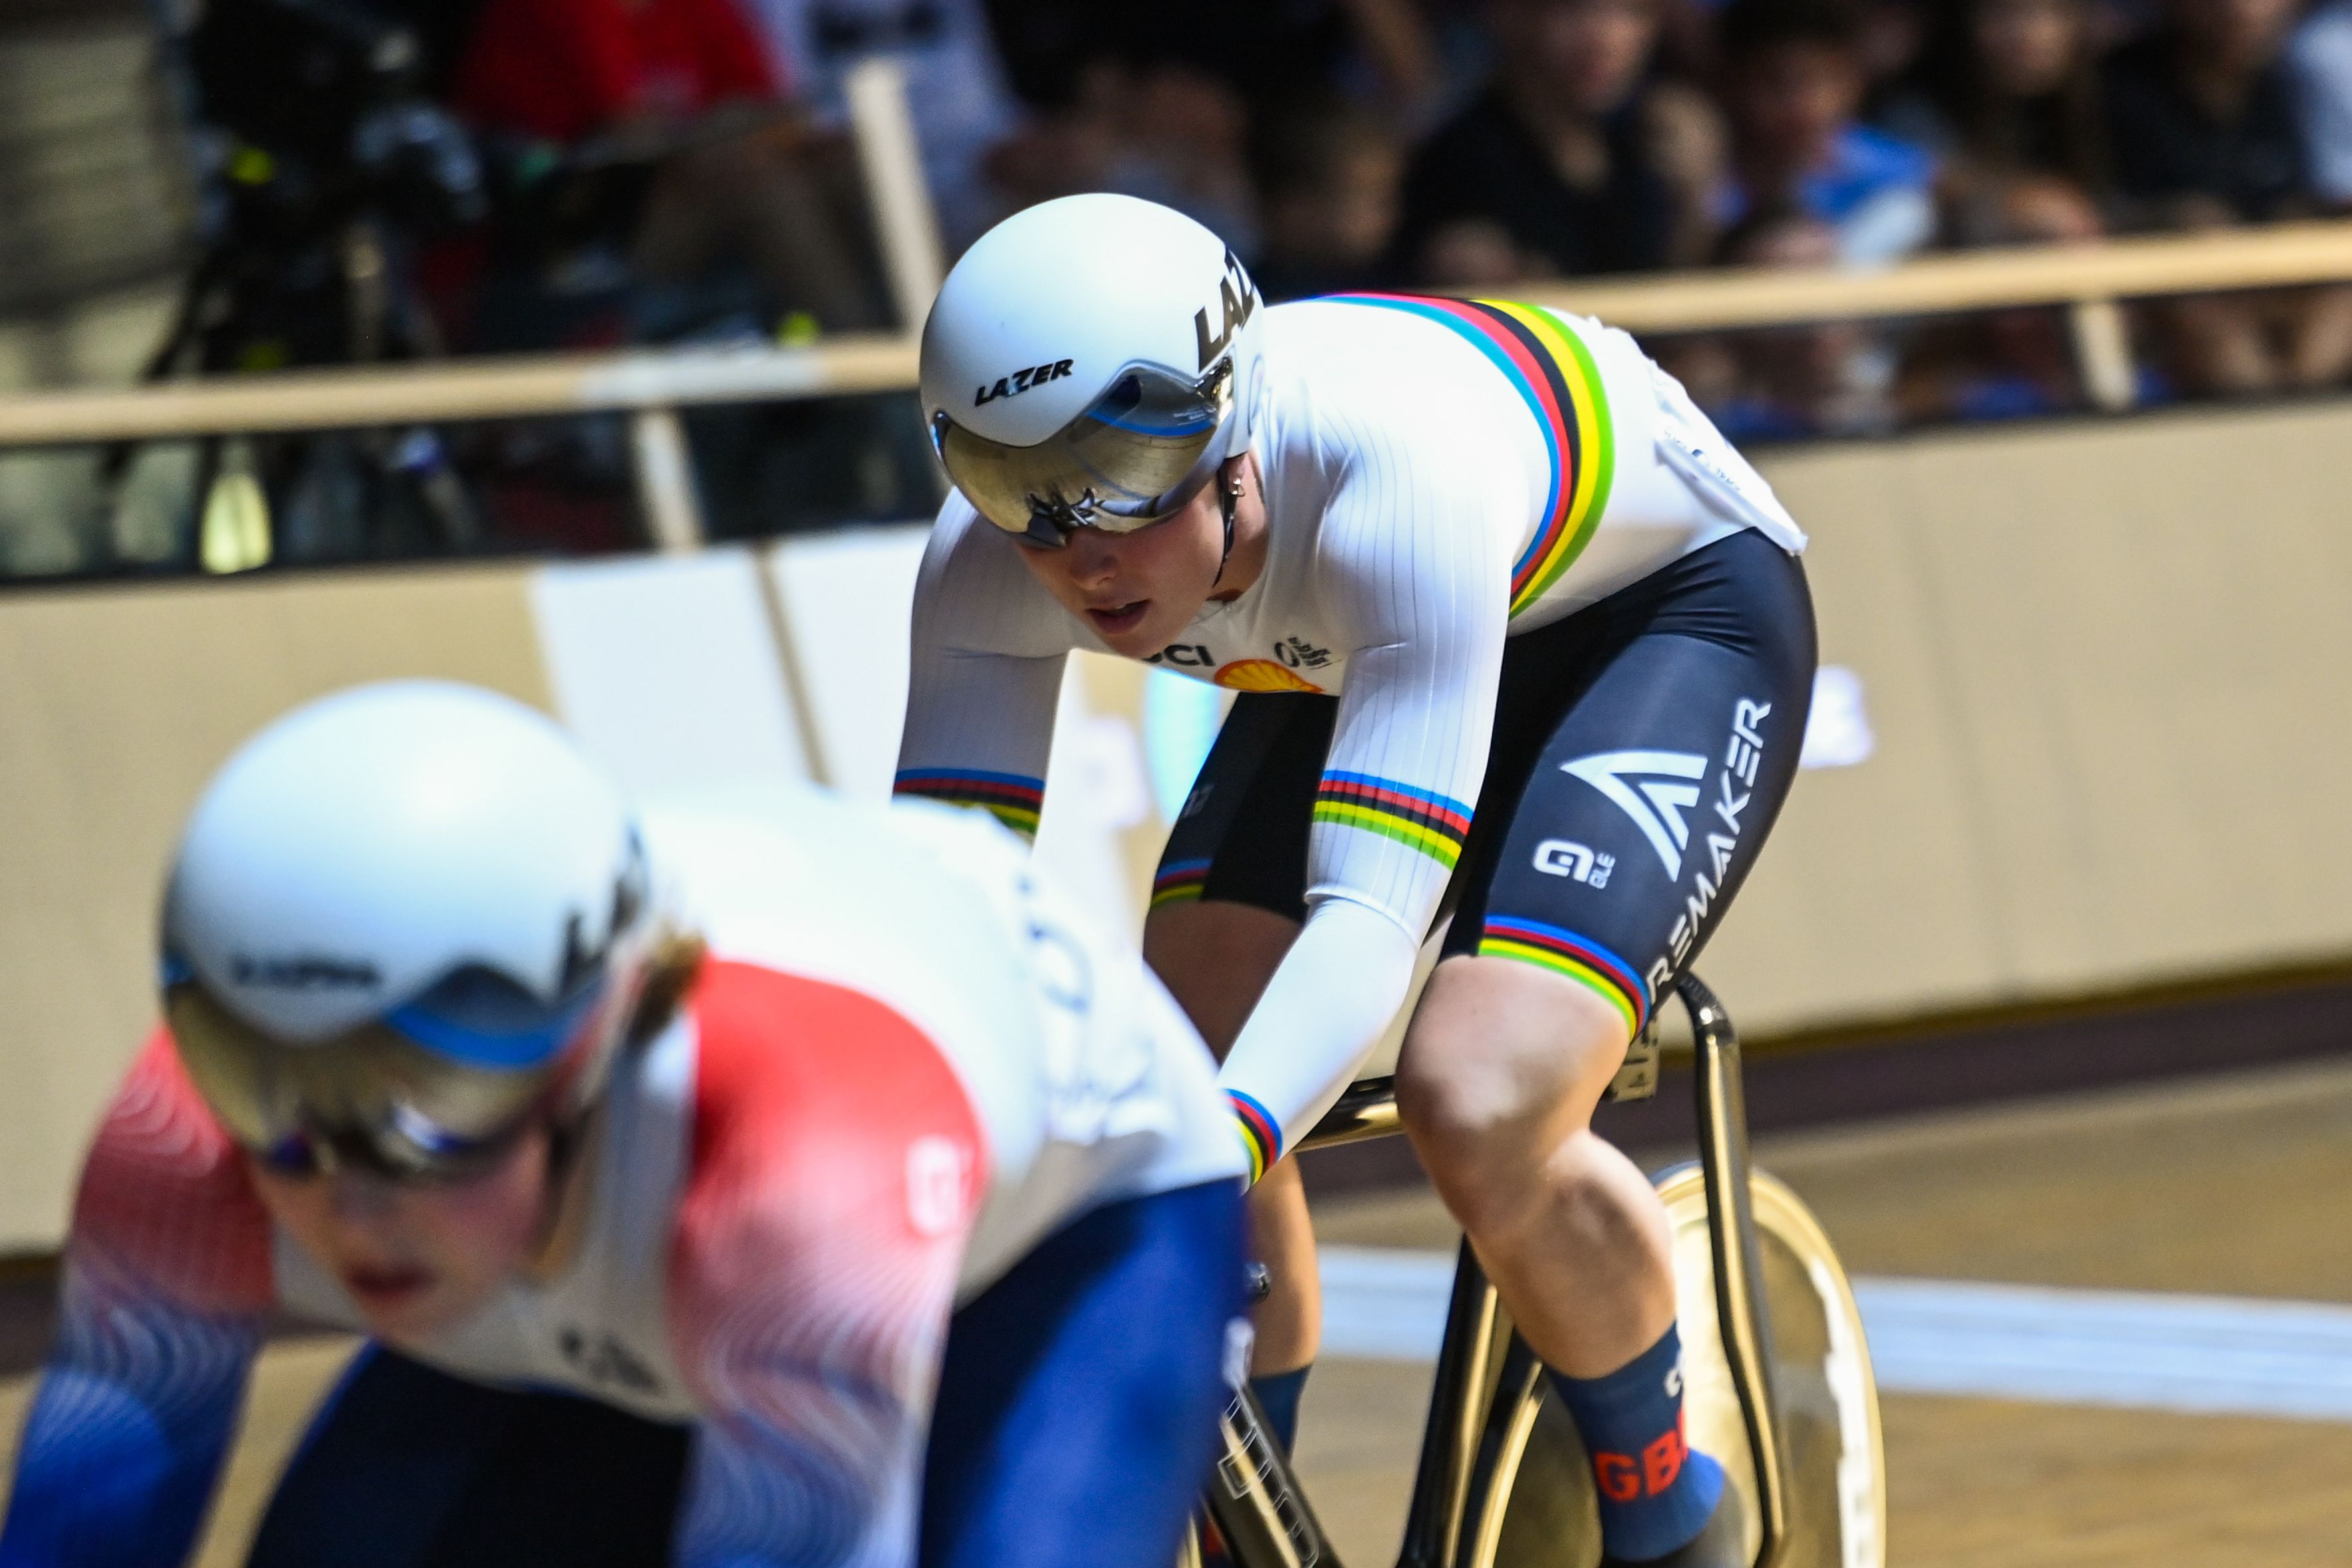 UCI Cycling World Championships: Santini out in force with rainbow jerseys  and dedicated kits